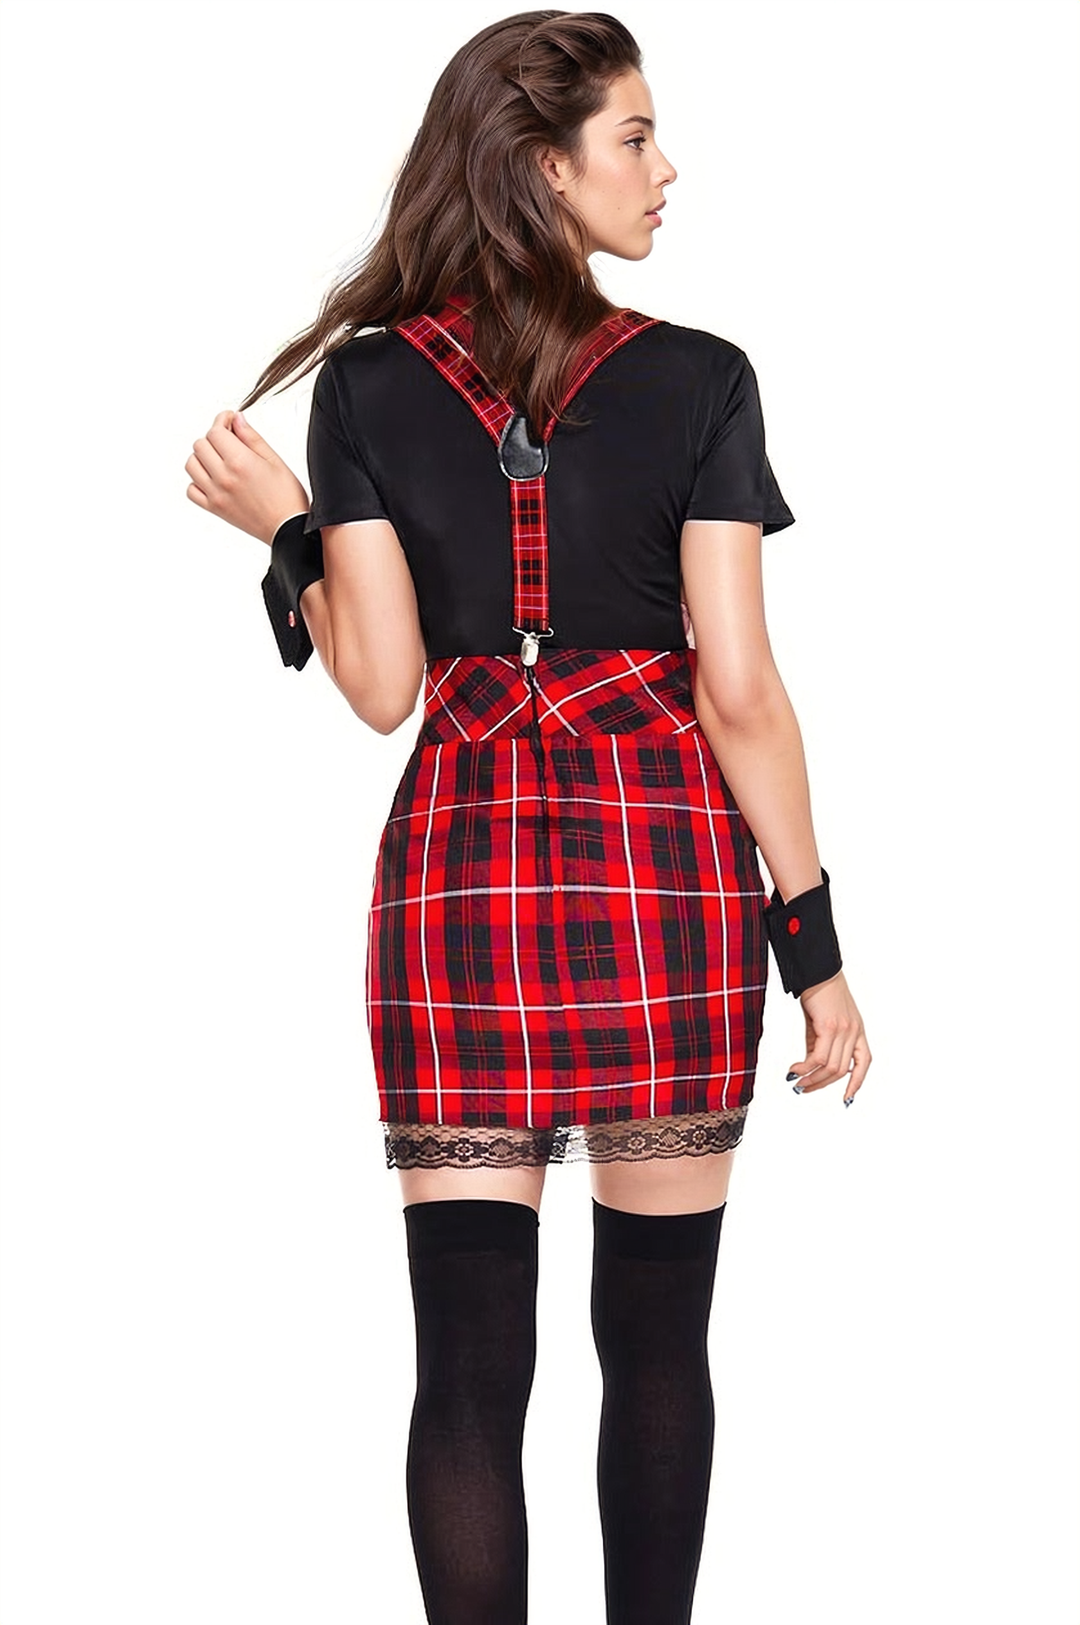 Shop this women's sexy school girl costume featuring a red plaid high waist skirt